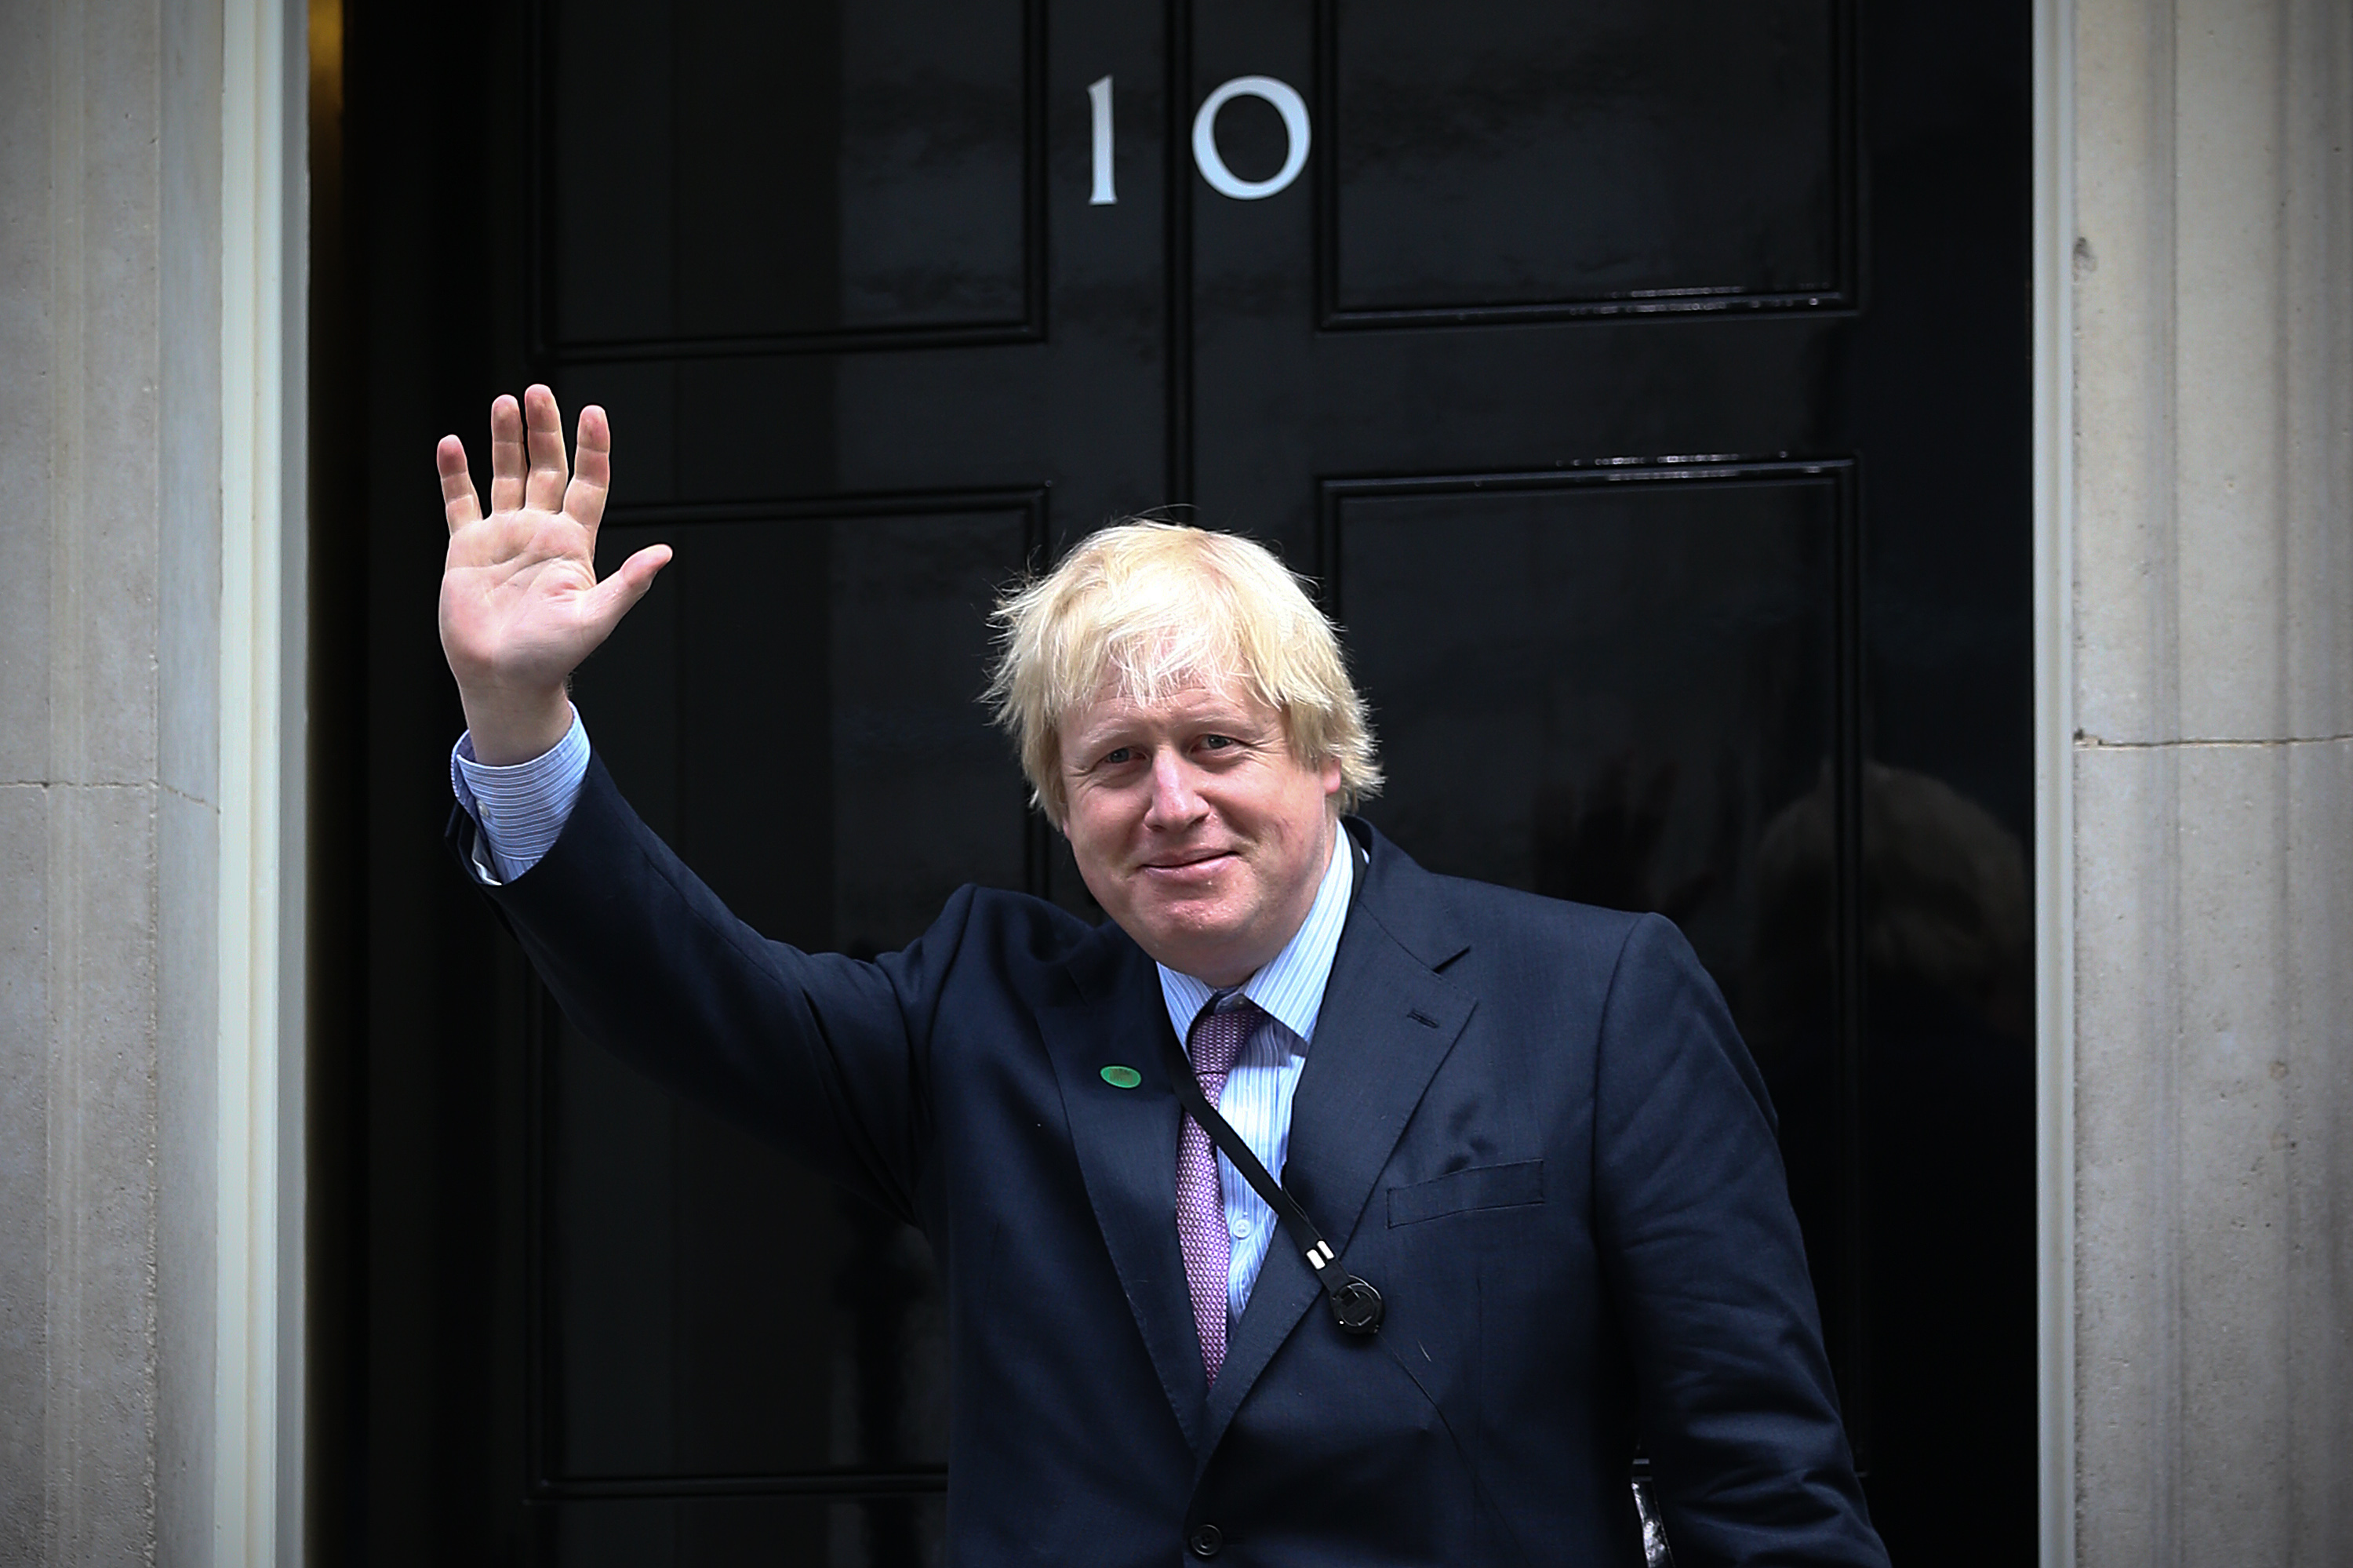 London Mayor and MP for Uxbridge and South Ruislip, Boris Johnson, arrives at Downing Street in London on May 11, 2015. (Carl Court—Getty Images)